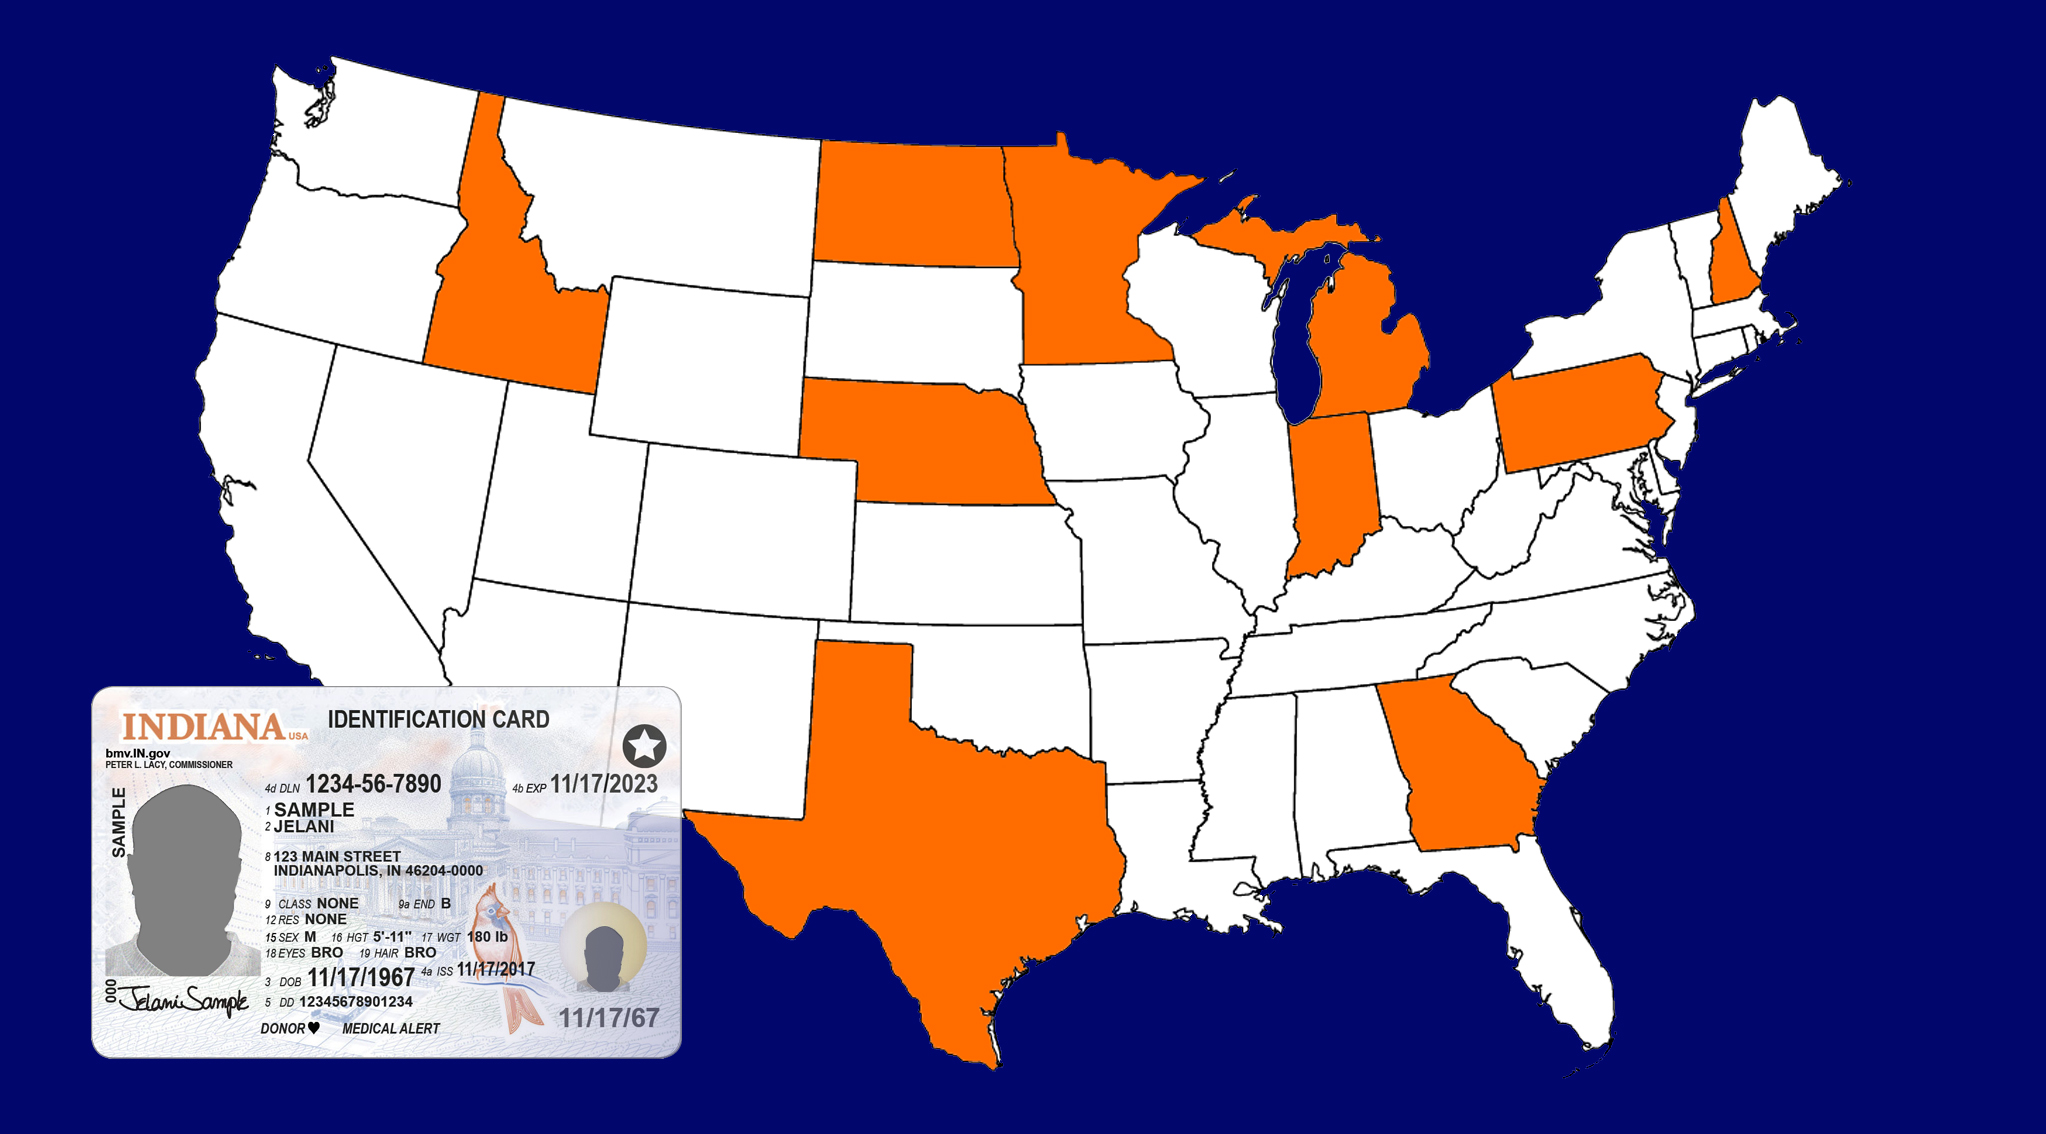 Some States Weigh Whether To Grant Driver's Licenses To Illegal Aliens  While Others Weigh Strengthening Bans